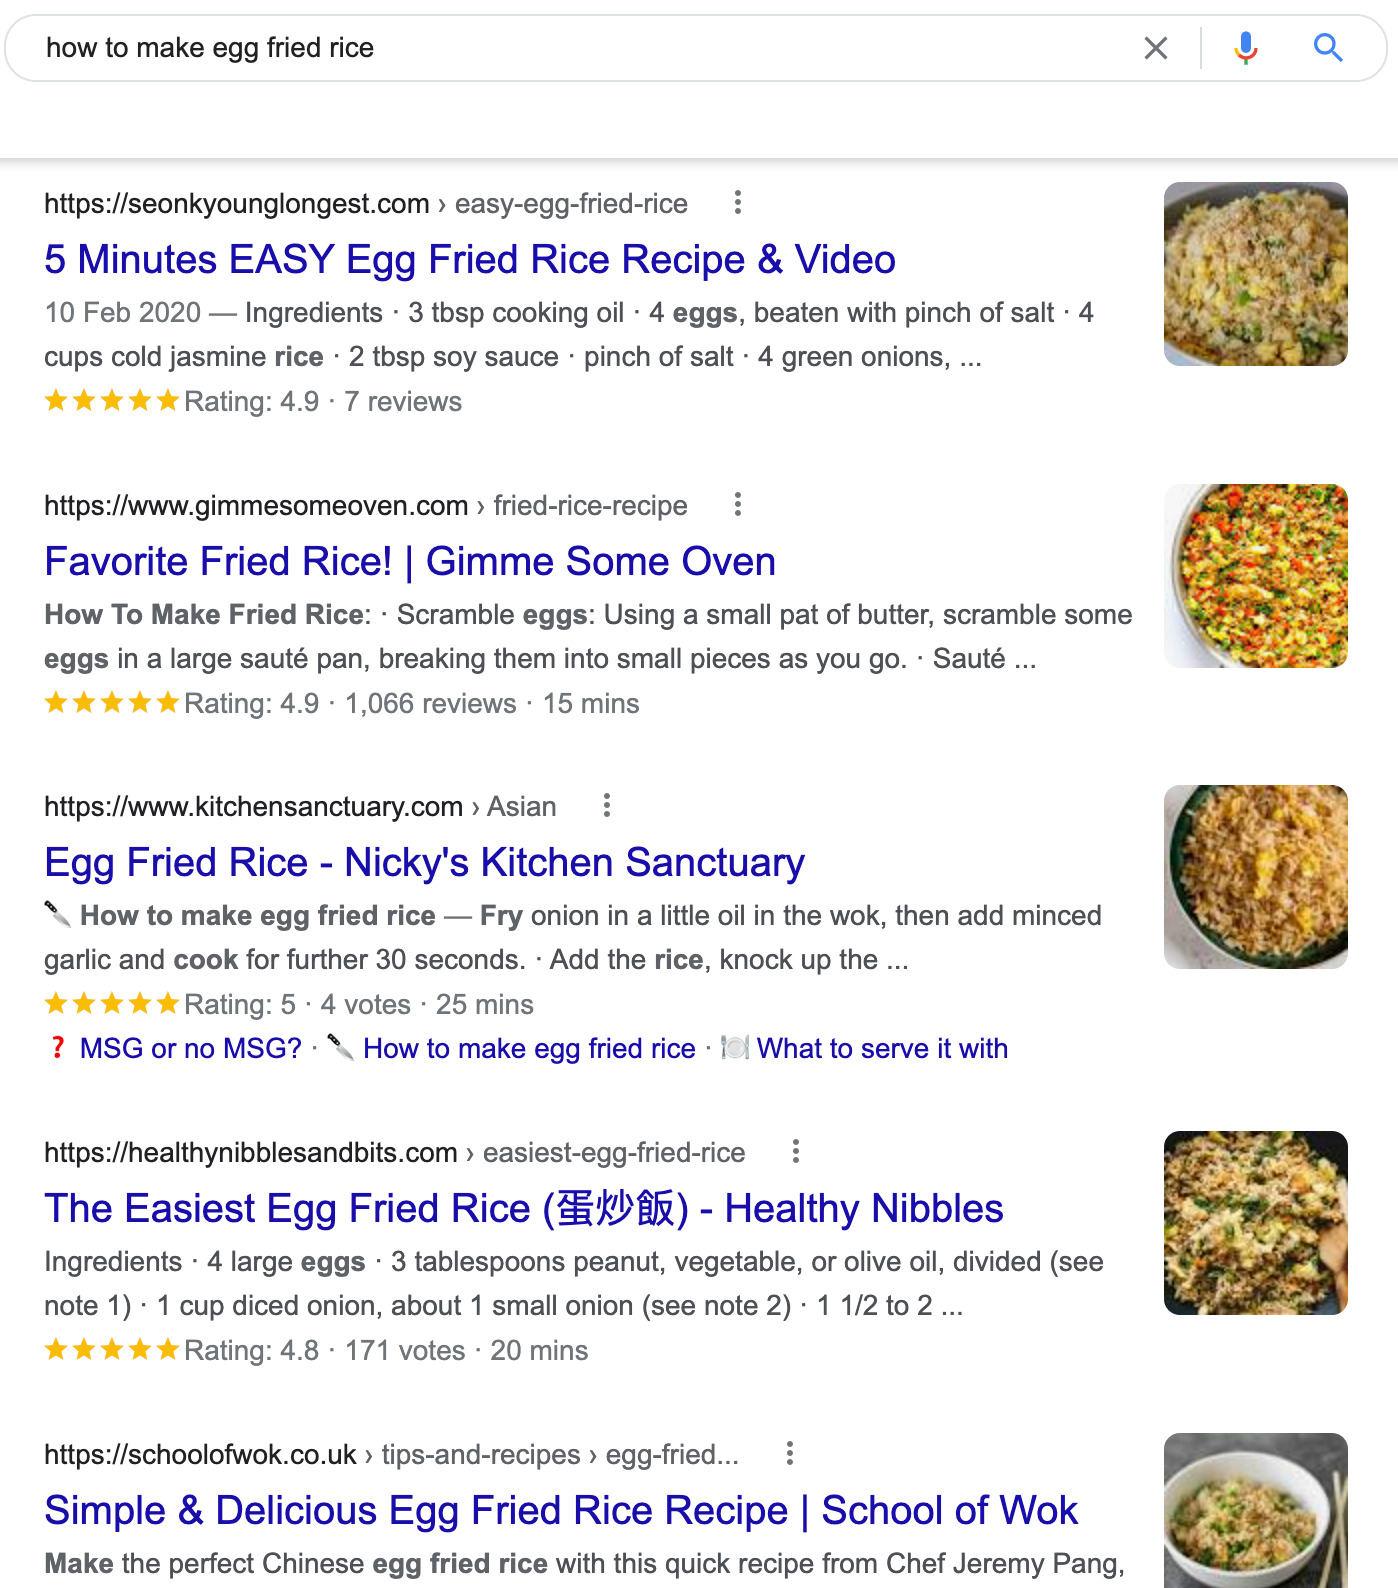 SERP for "how to make egg fried rice"
